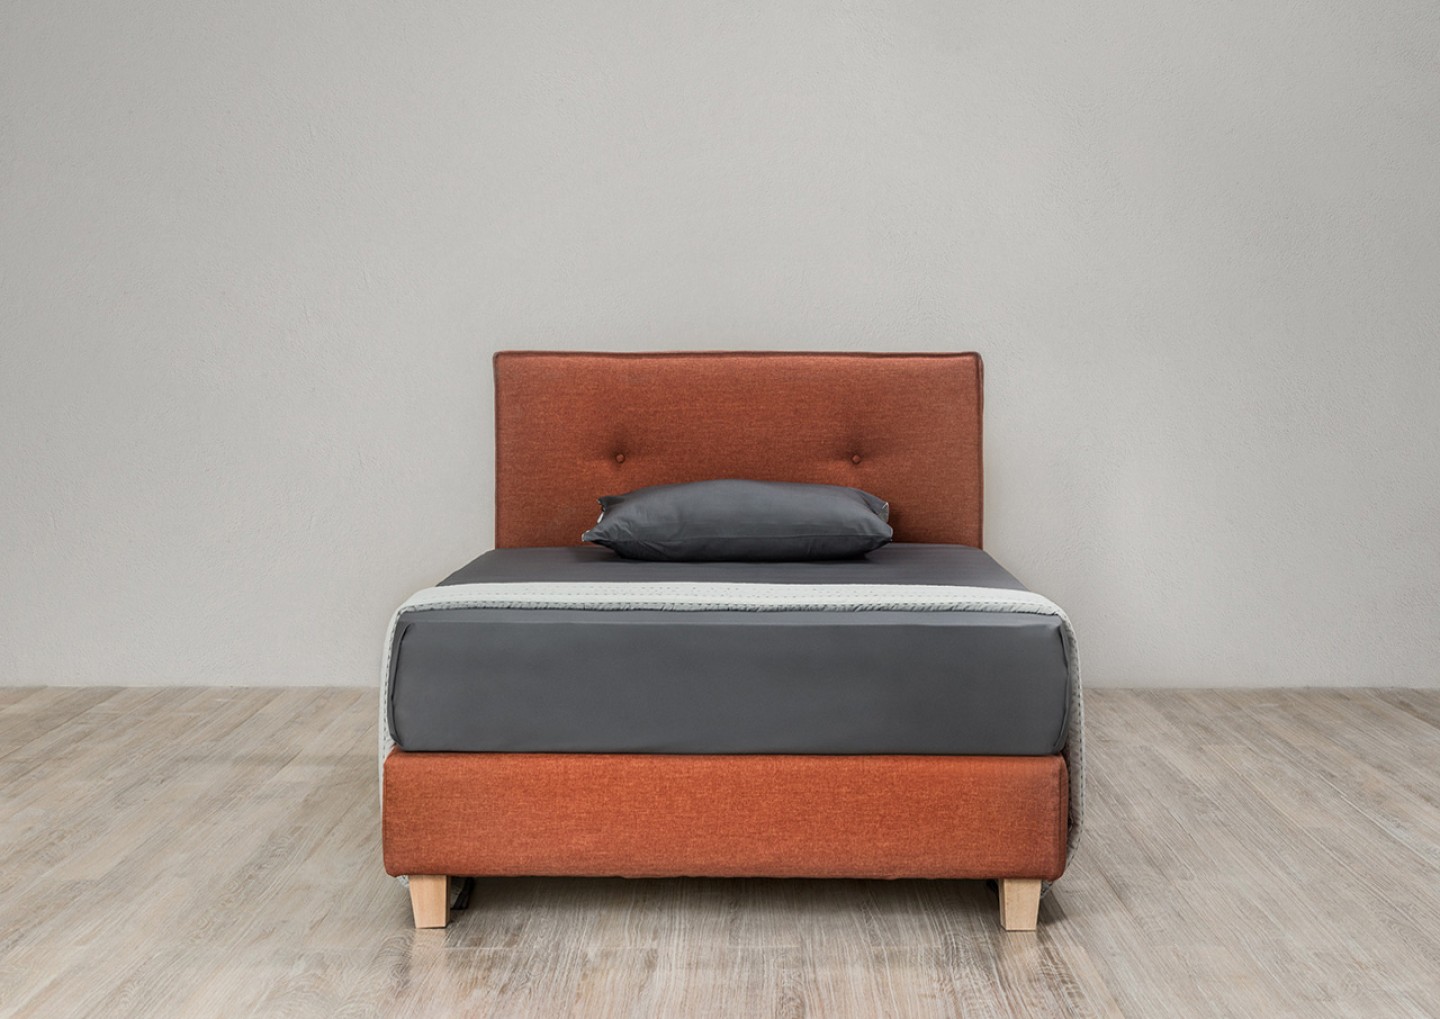 THE MASTER BED by Elite Strom